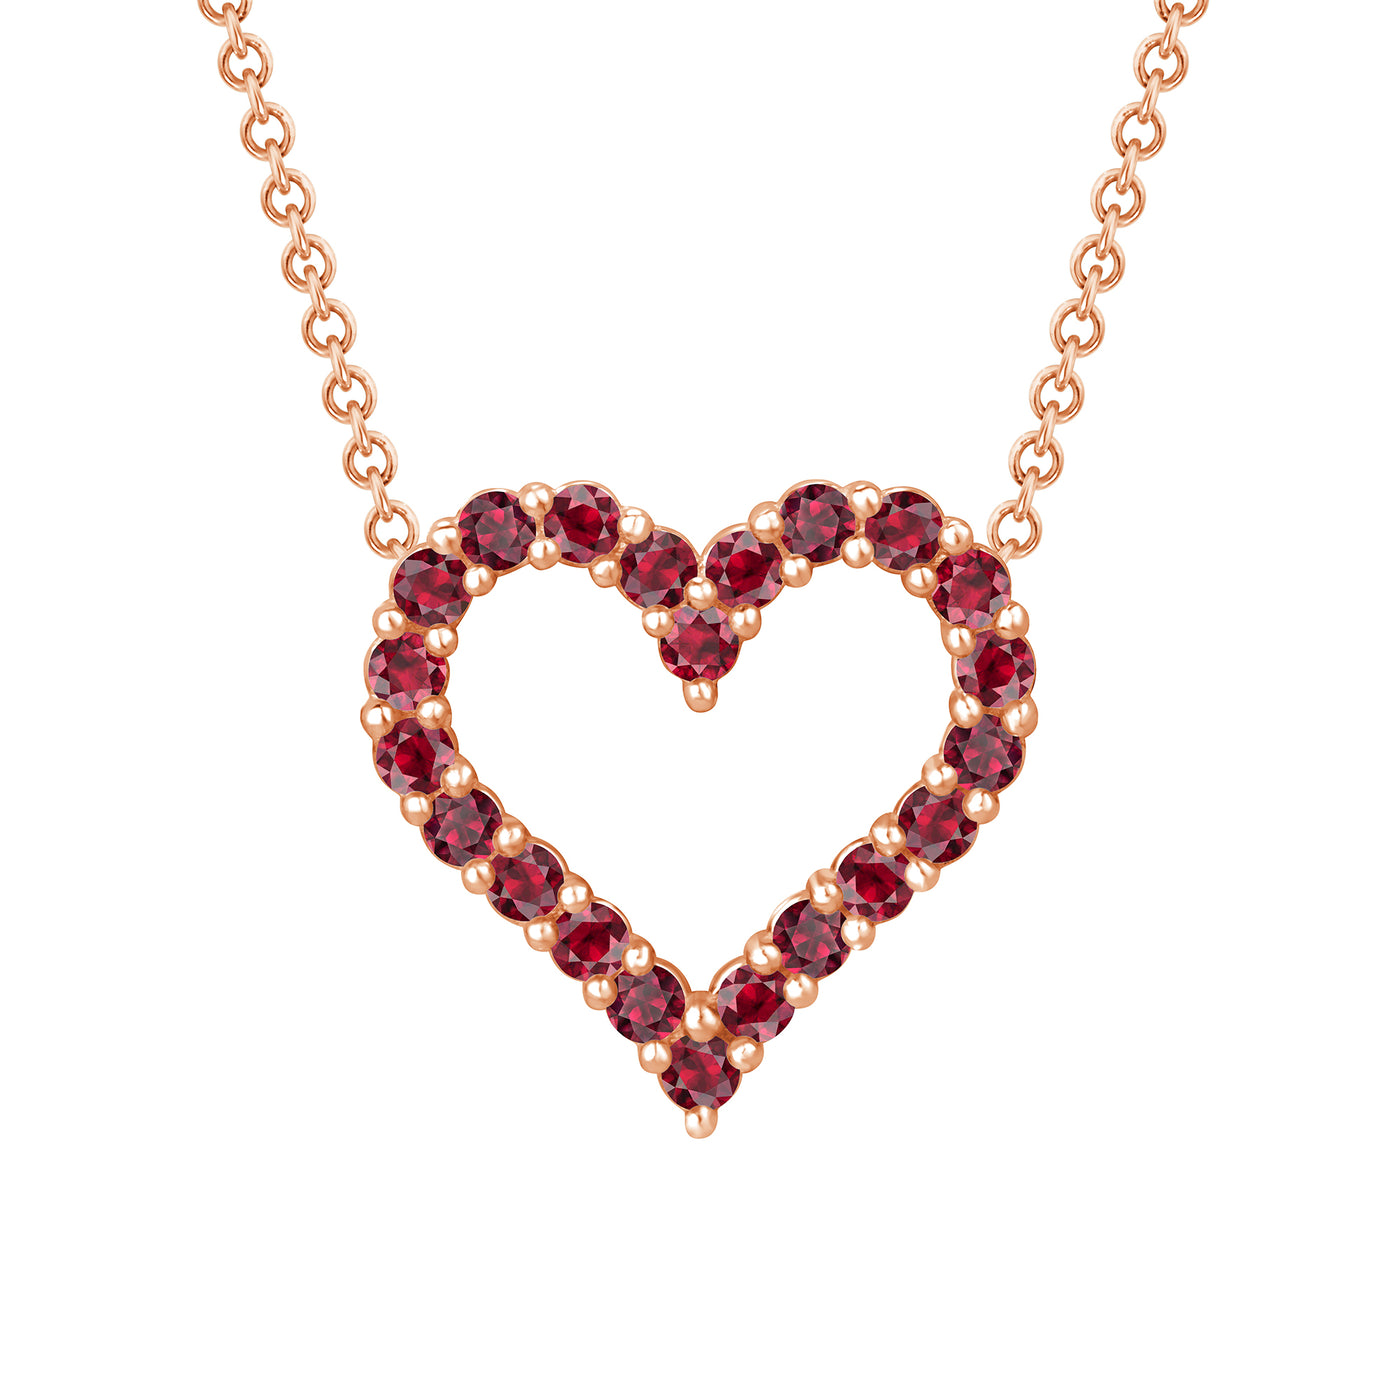 Ruby Heart Pendant 1/4 Carat Round Cut in Yellow, Rose or White Gold 16" Chain